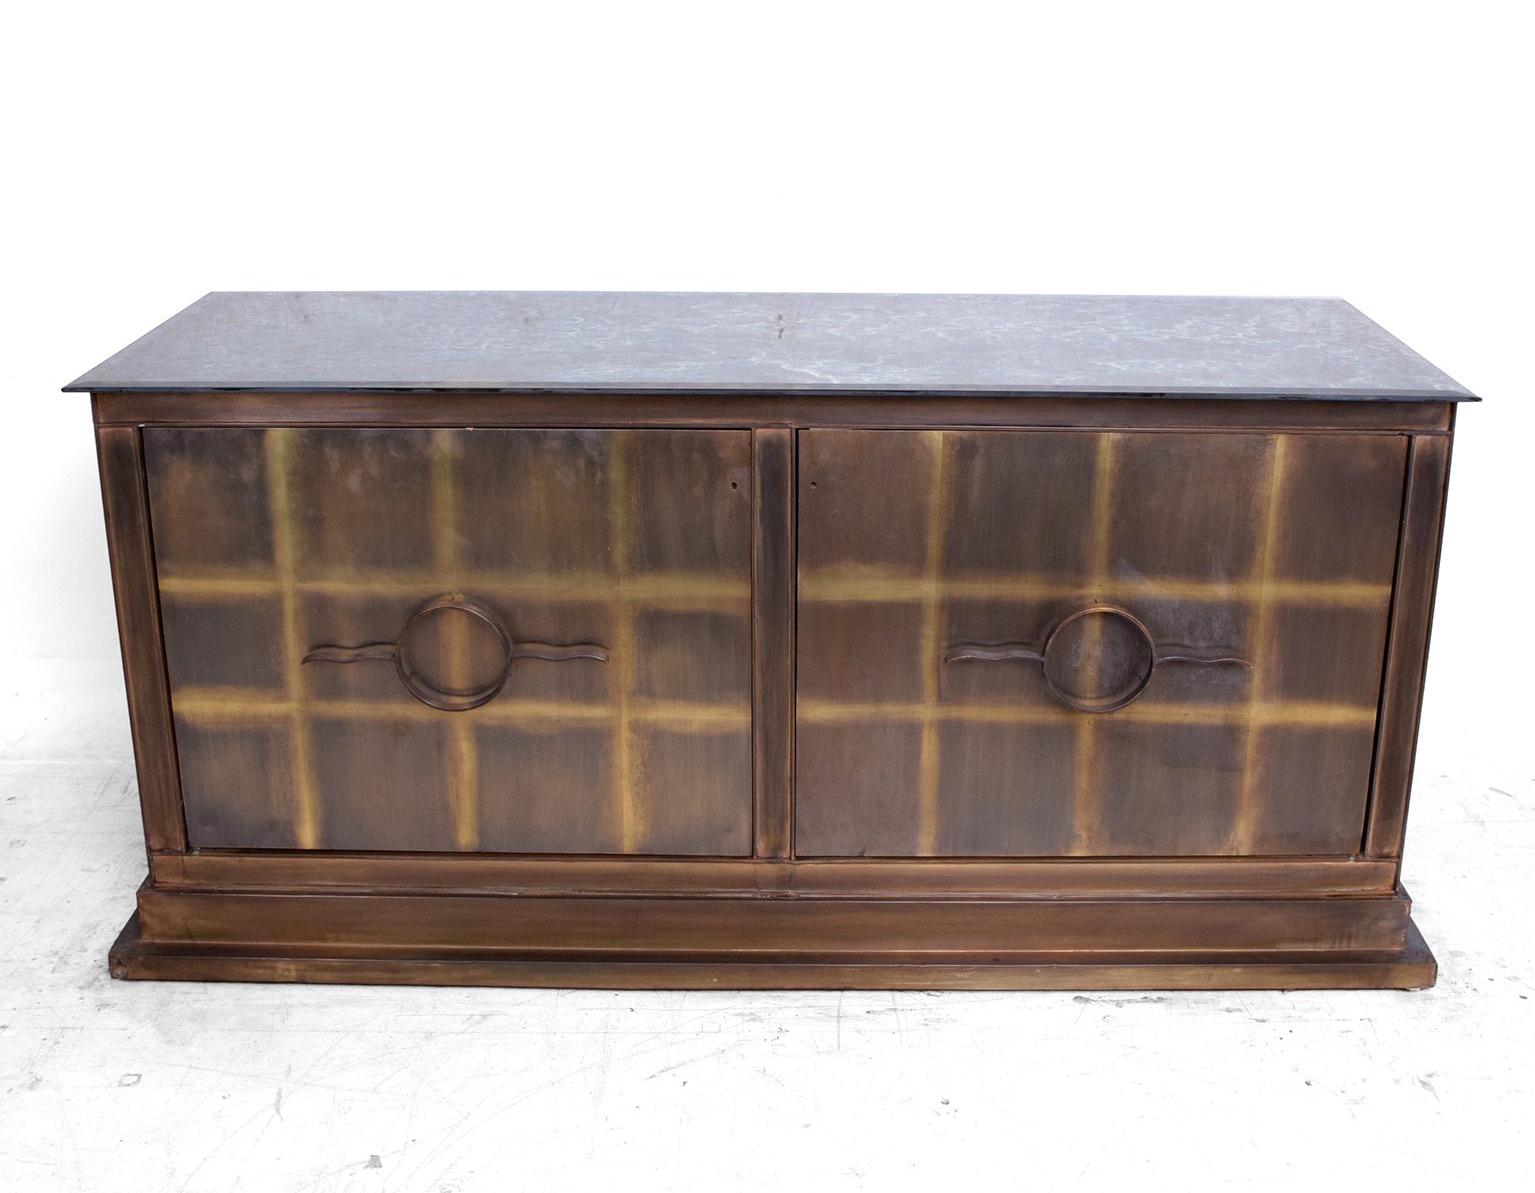 For your consideration a pair of bronze credenzas. Constructed with solid sheets of bronze and metal frame. Eglomized glass top with beveled edges.

Unusual pull handles. 

Credenzas were custom-made for a upscale Hotel in Mexico City.
There is